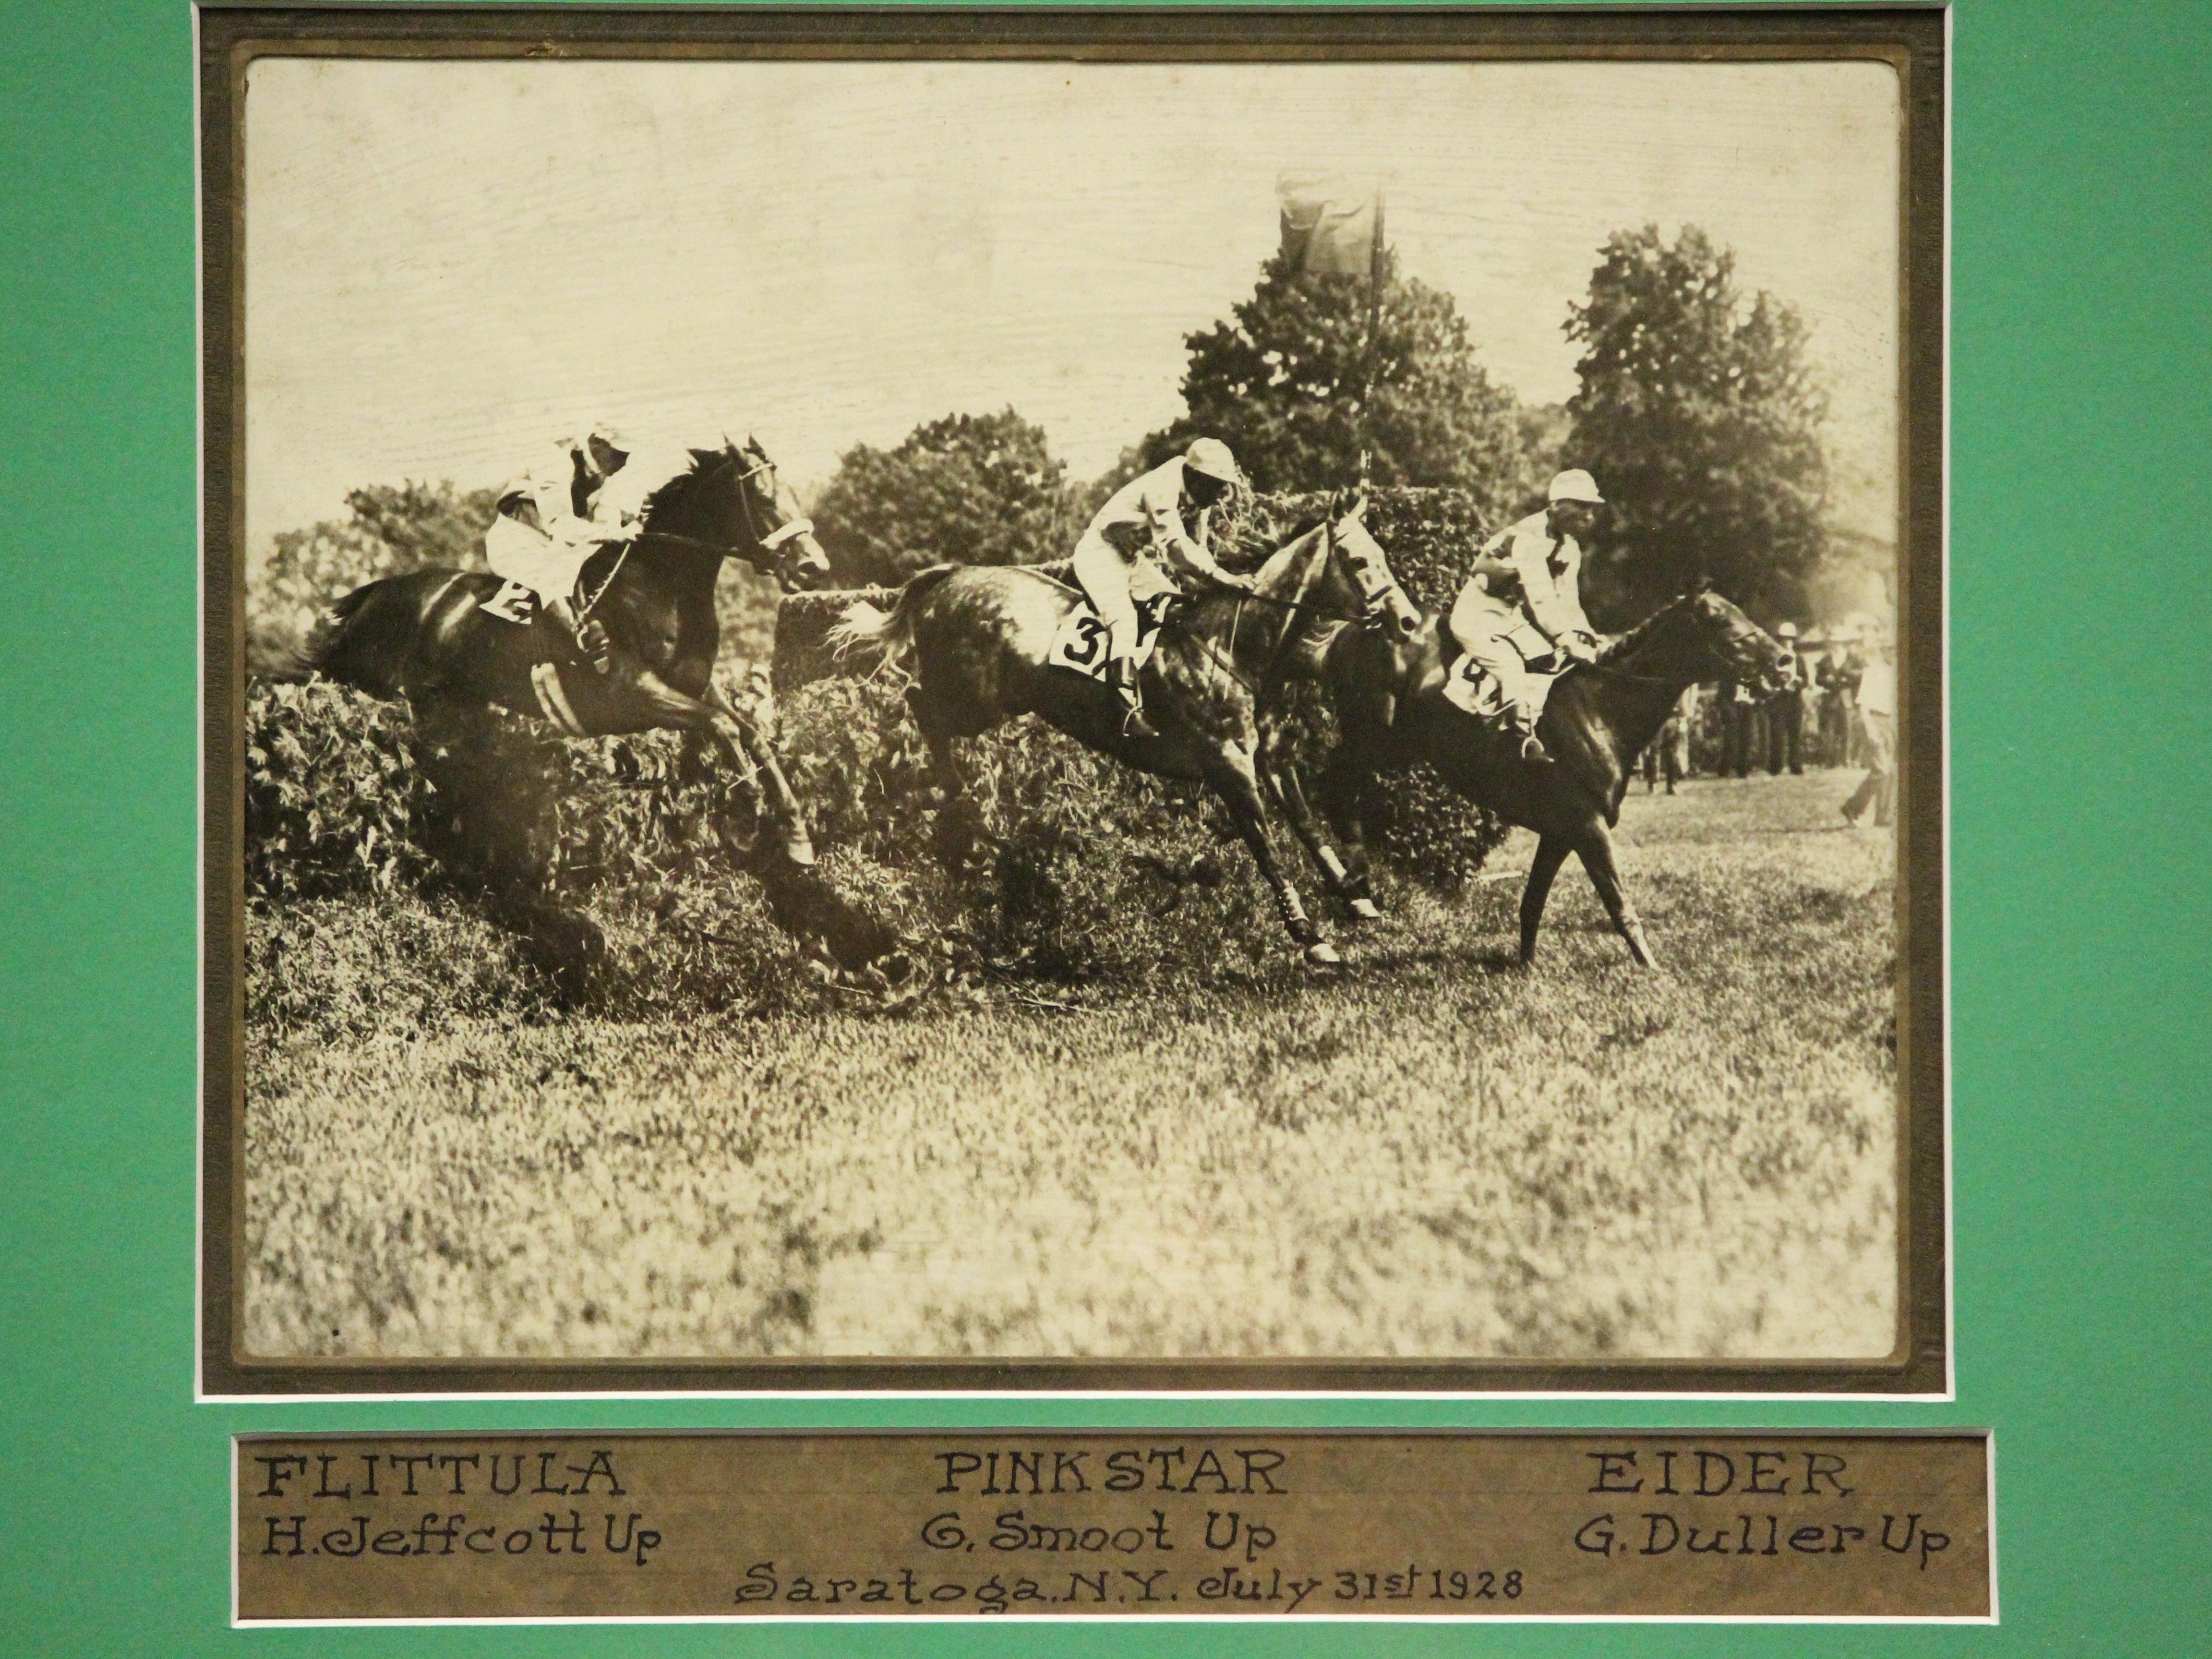 Classic B&W photo of three steeplechase horses & their jockeys clearing a brush fence at Saratoga Springs, NY racetrack from July 31st 1928

Photo Sz: 9